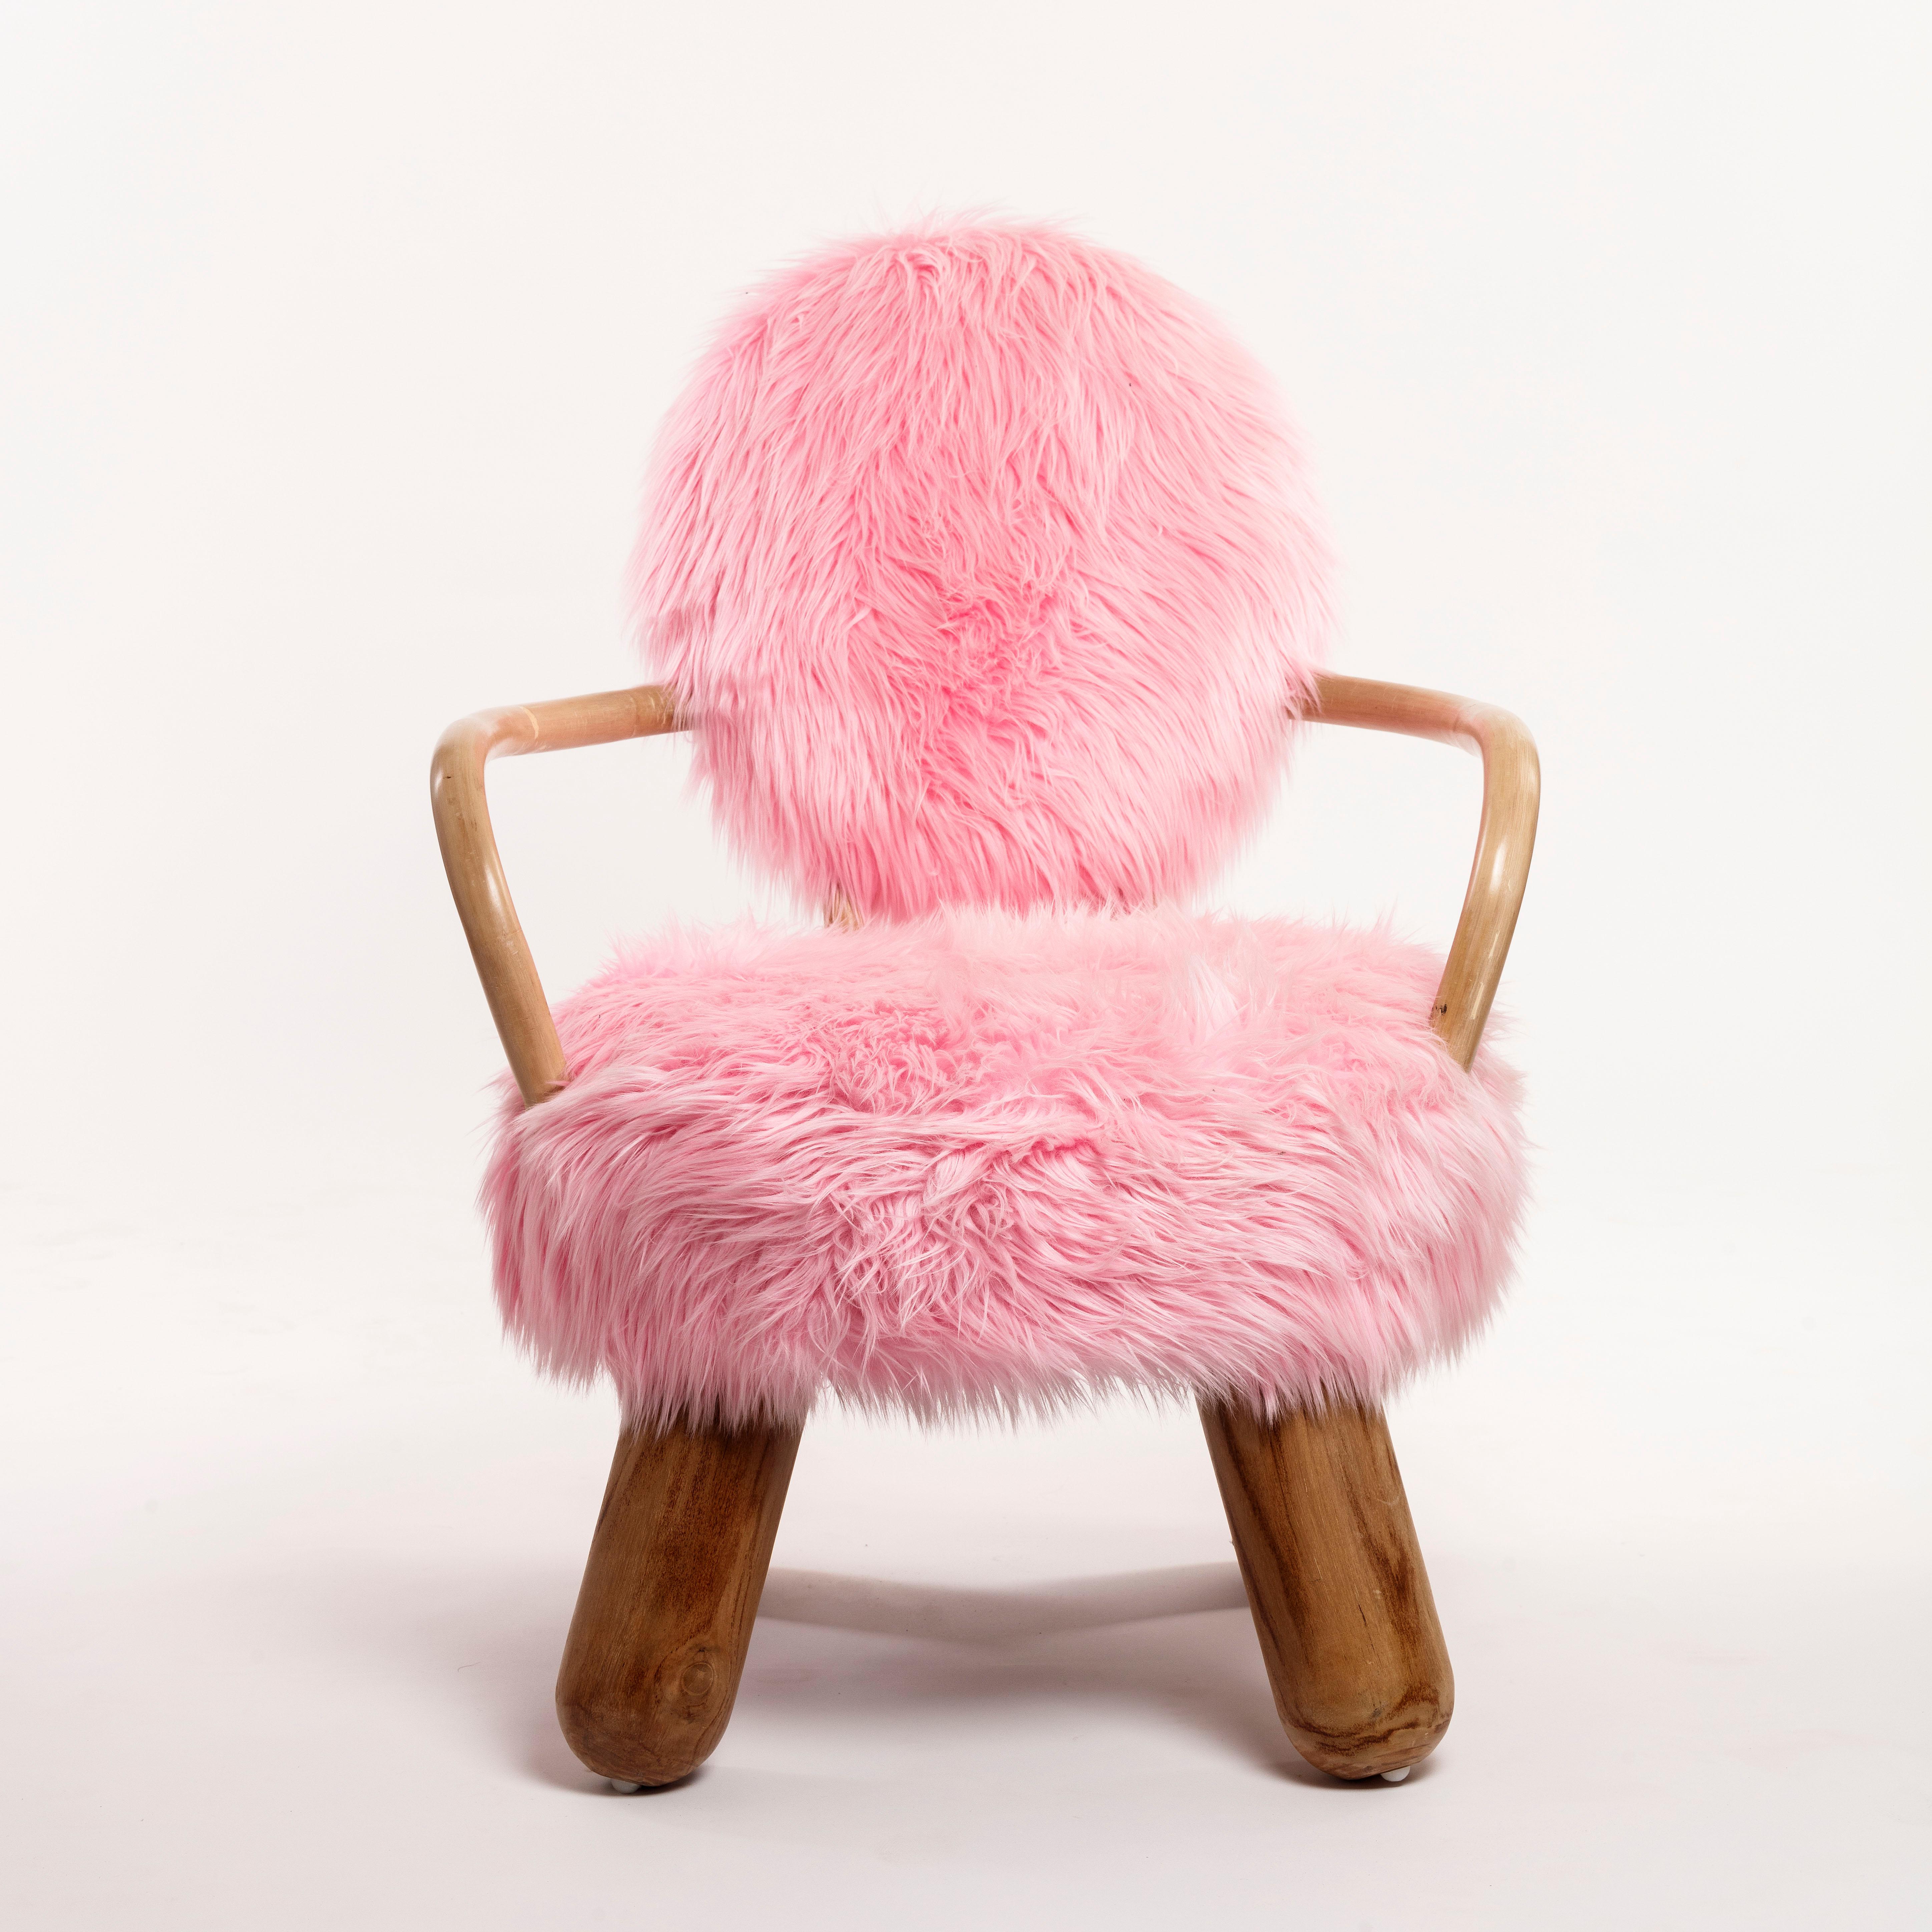 These rare exceptionally impressive handmade chairs designed by Olivier de Schrijver (born 1958 in Congo) combine, with a unique style, an original and spectatular elegance to a comfy coziness.

Flirting subtly and gently with eccentricity while